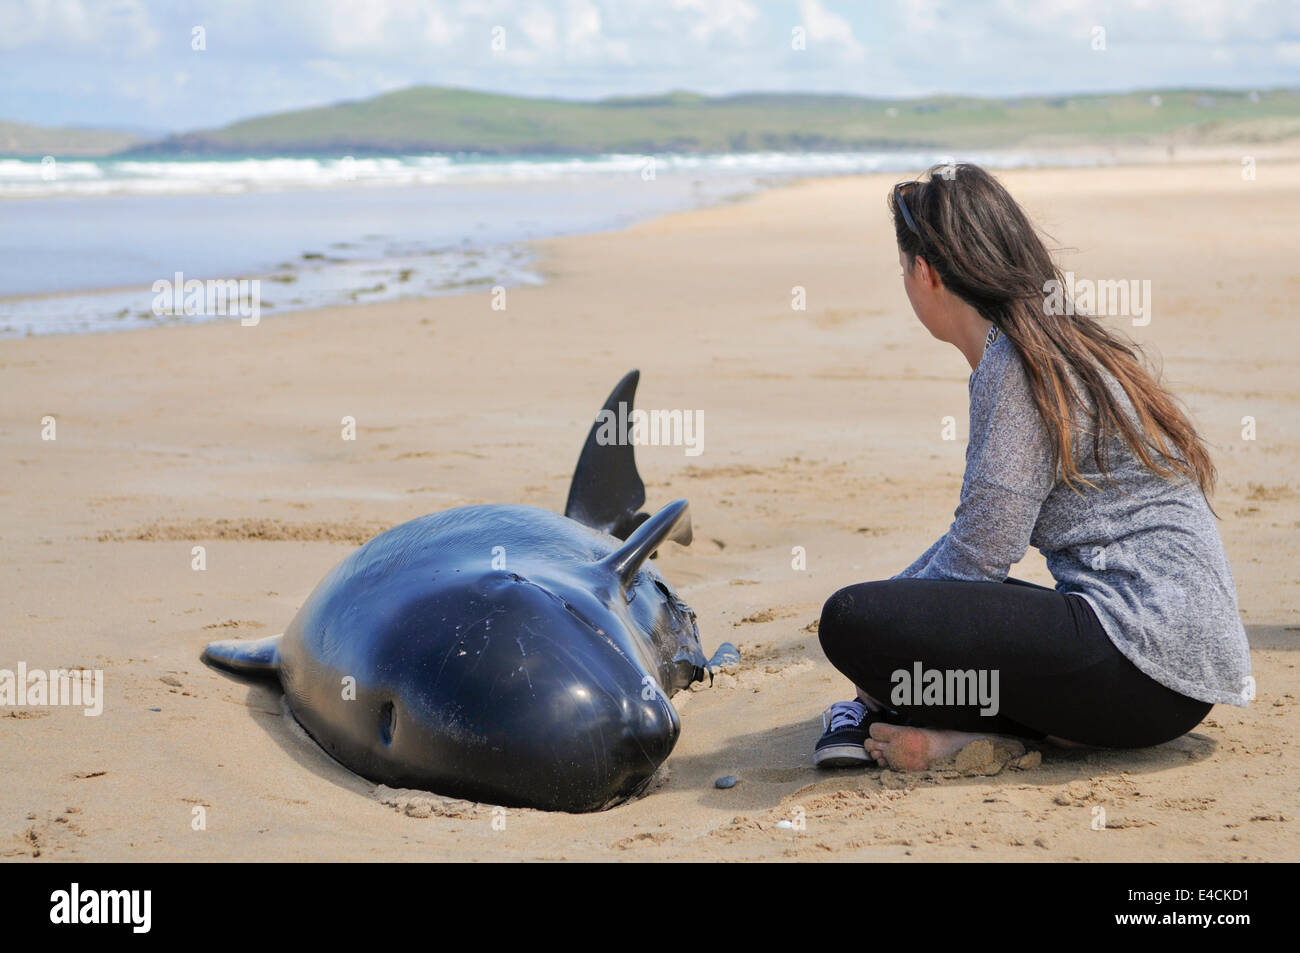 Falcarragh Strand, Donegal, Ireland. 8 Jul 2014 - An upset young lady sits crying beside one of twelve pilot whales before it died after deliberately beaching. The pod had originally been rescued, but beached a second time. Credit:  Stephen Barnes/Alamy Live News Stock Photo